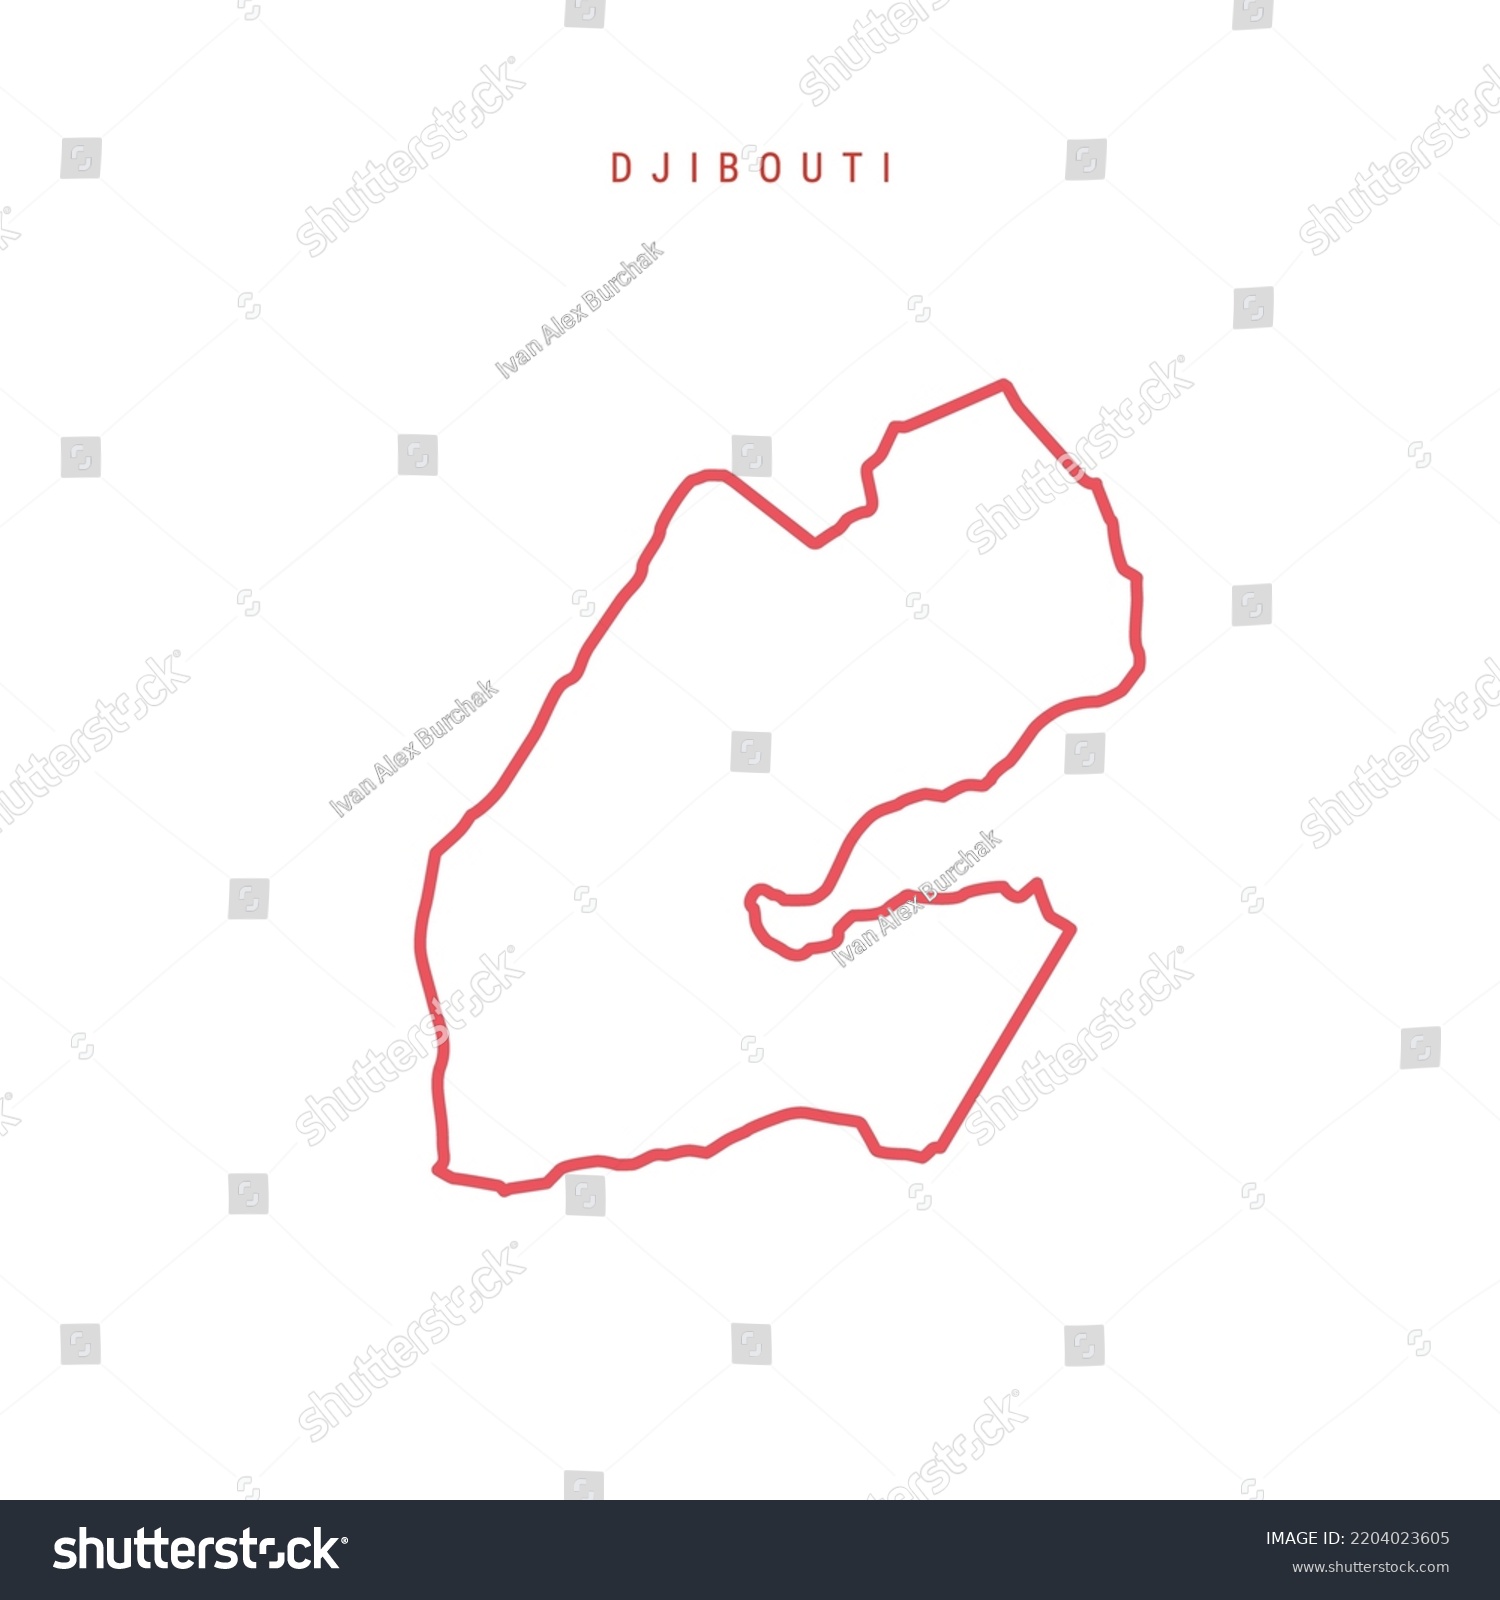 SVG of Djibouti editable outline map. Djiboutian red border. Country name. Adjust line weight. Change to any color. Vector illustration. svg